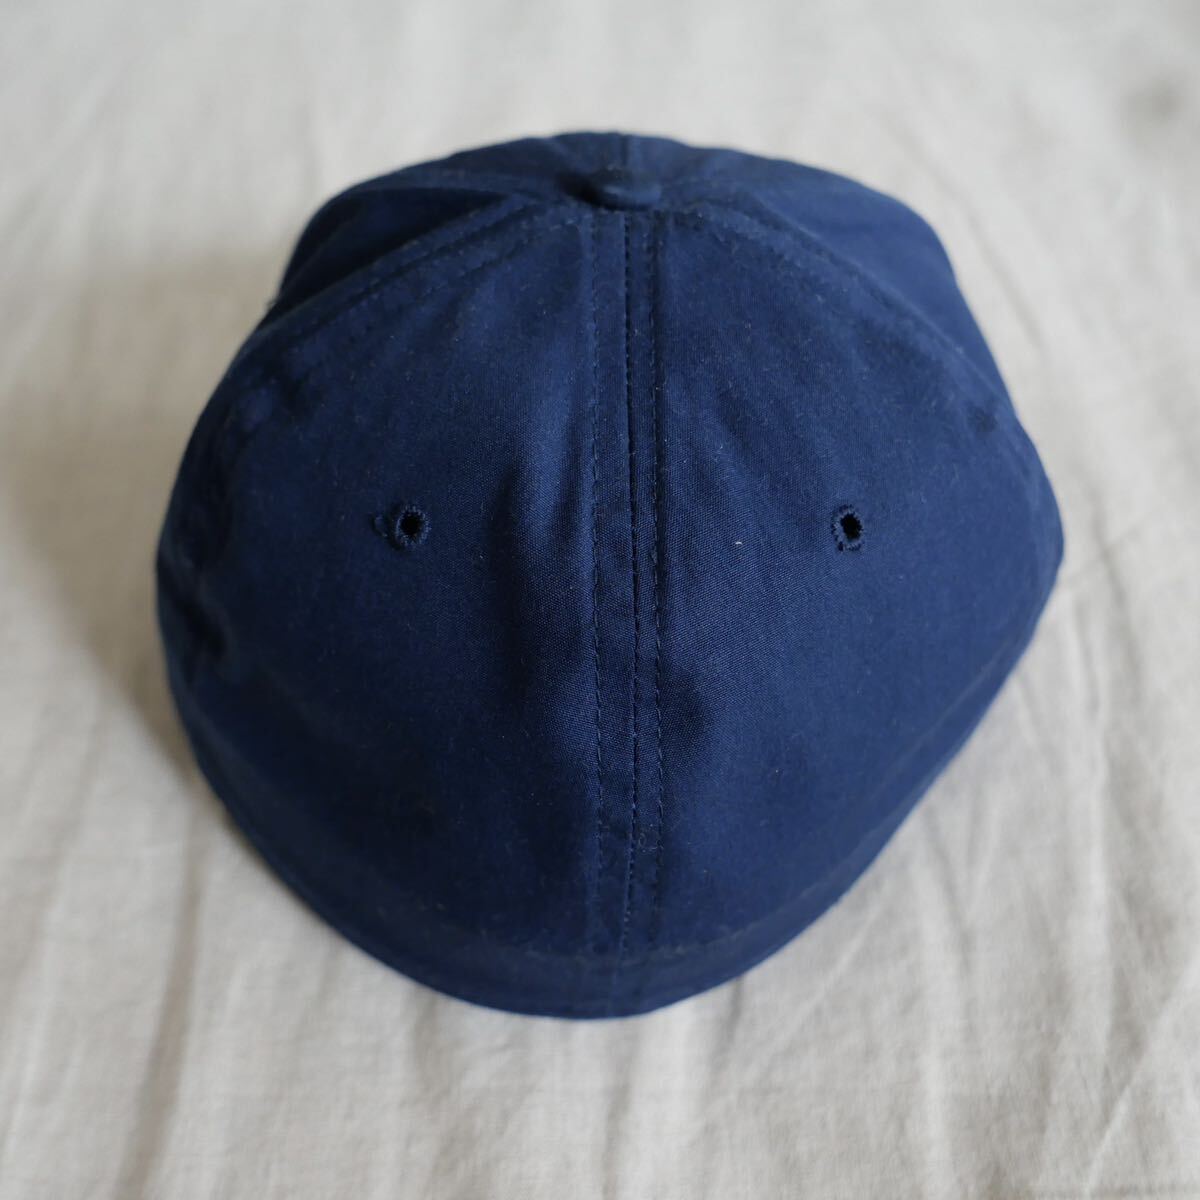 80s DEAD STOCK US NAVY UTILITY CAP utility cap dead stock America navy 7 1/2 K&S MANUFACTURING VINTAGE America made 